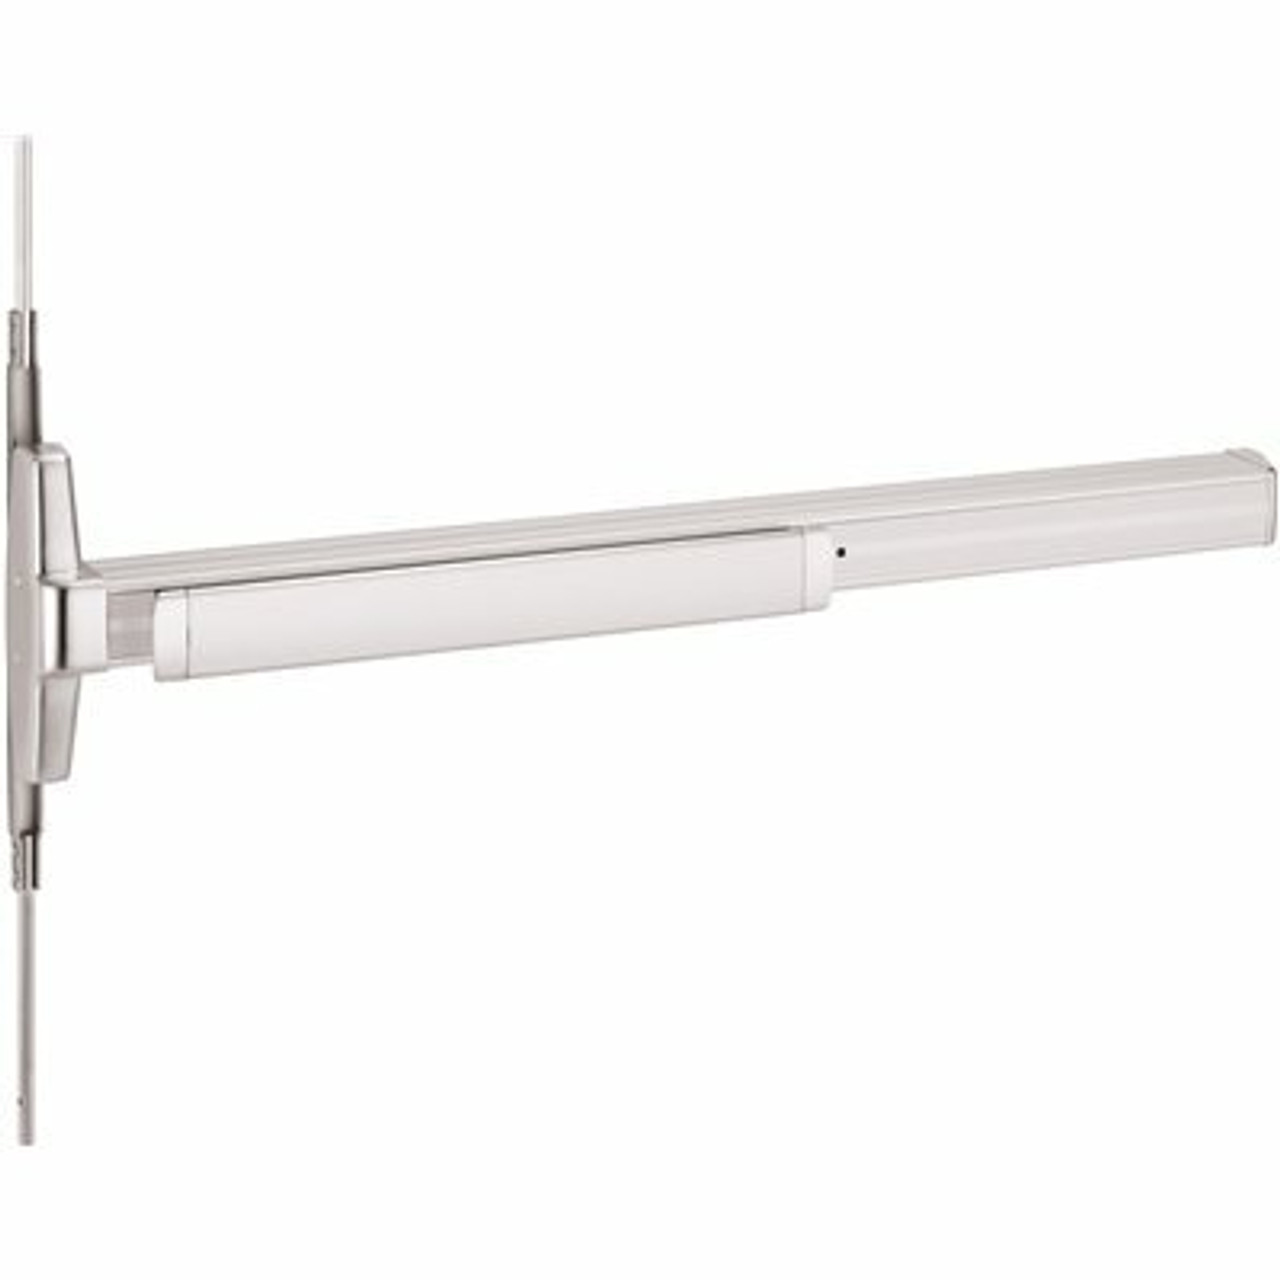 Von Duprin Grade-1 Aluminum Surface Vertical Rod Exit Device, Non-Handed, Exit Only - 310013217